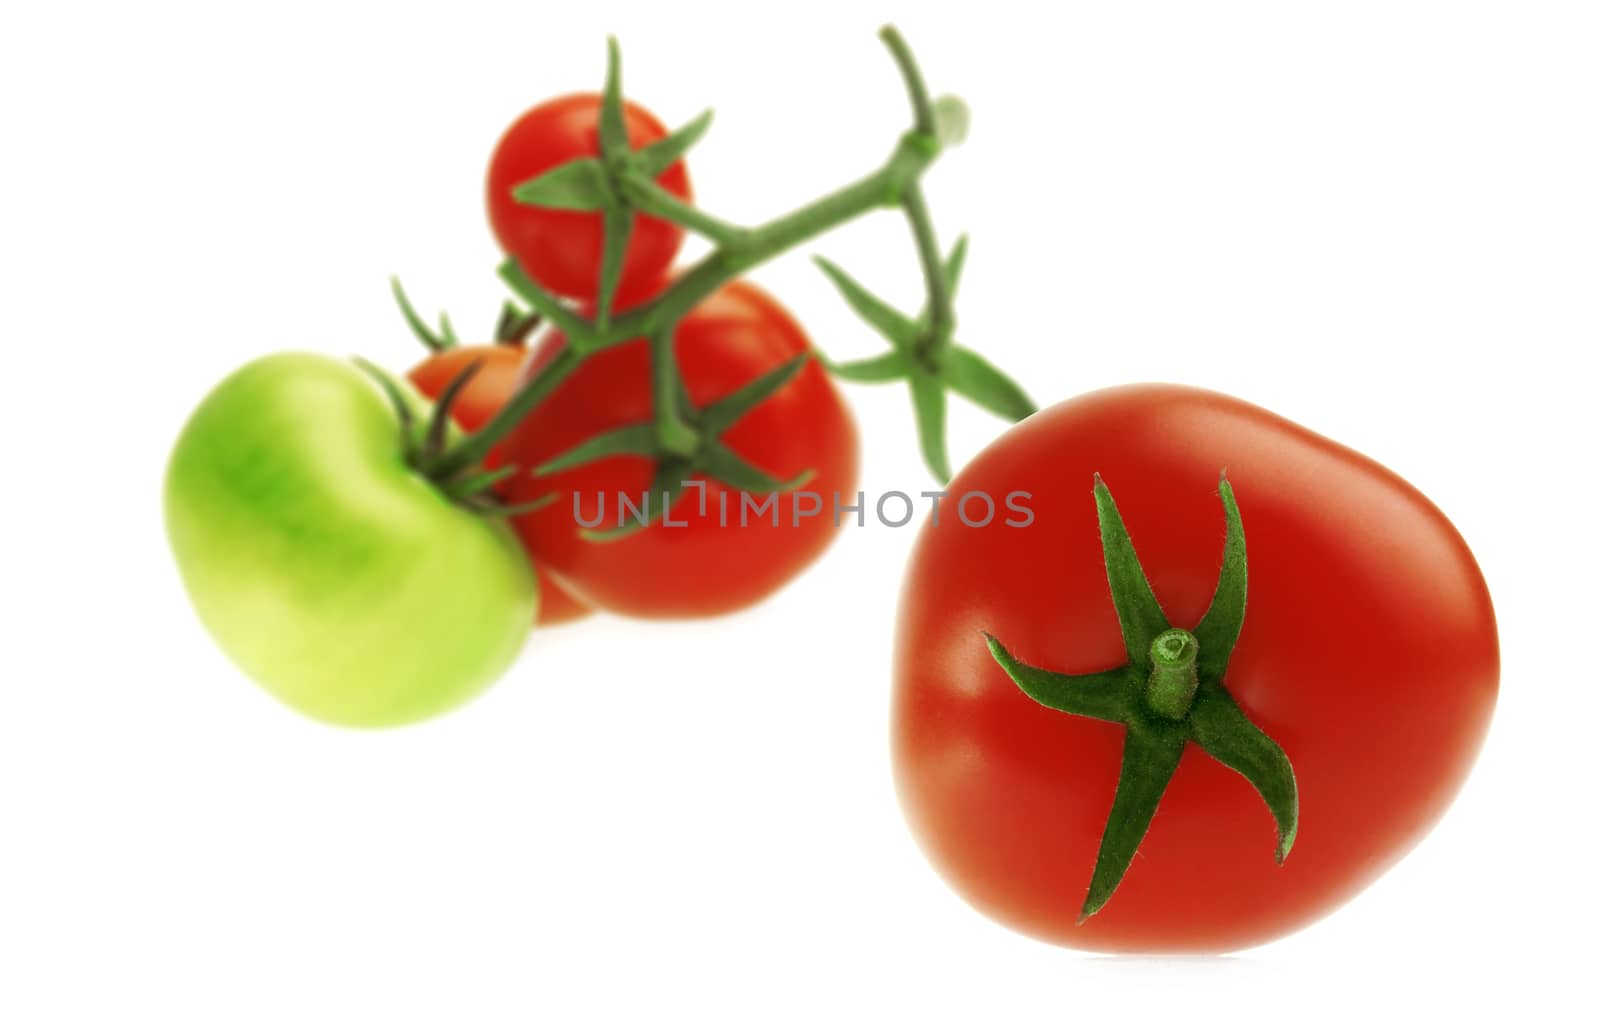 Bunch of fresh red and green Tomatoes on white background.